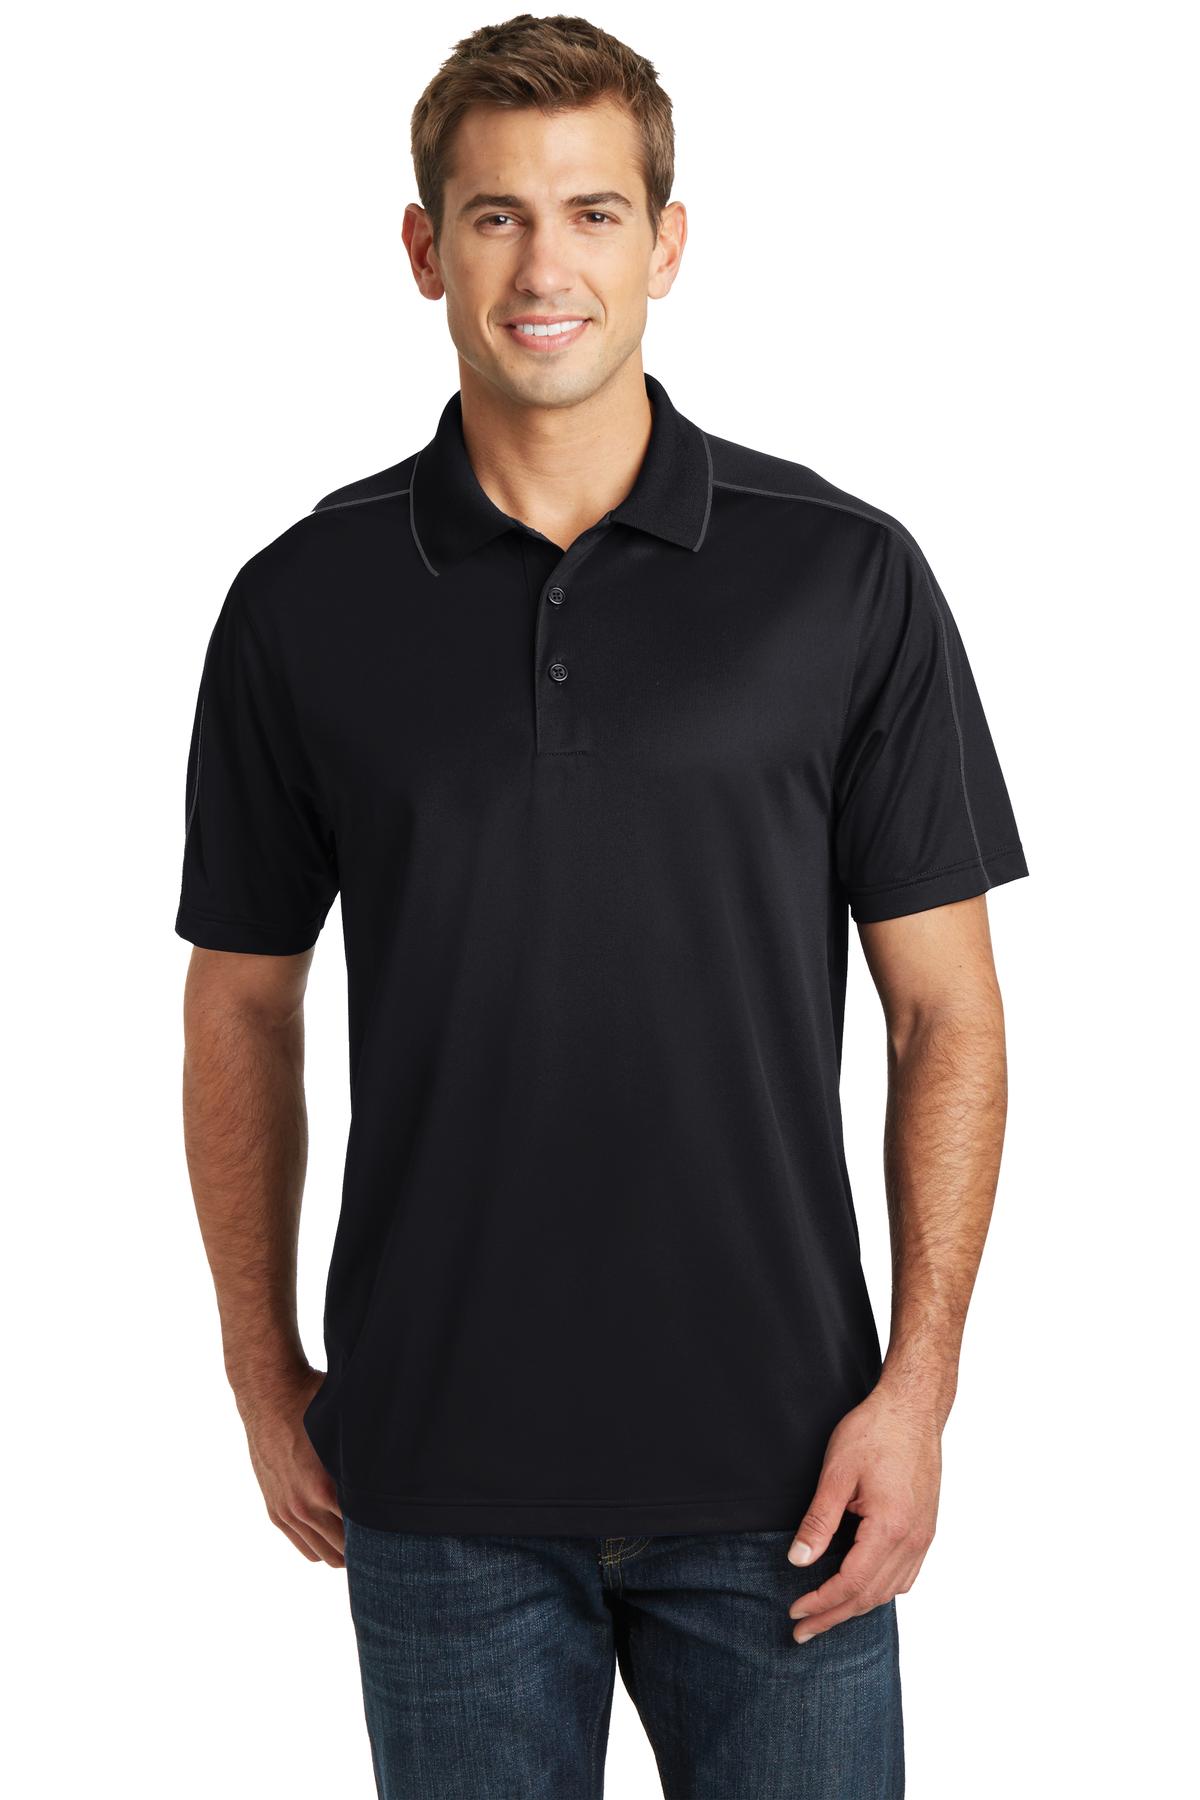 Sport-Tek Hospitality Activewear Polos&Knits ® Micropique Sport-Wick® Piped Polo.-Sport-Tek